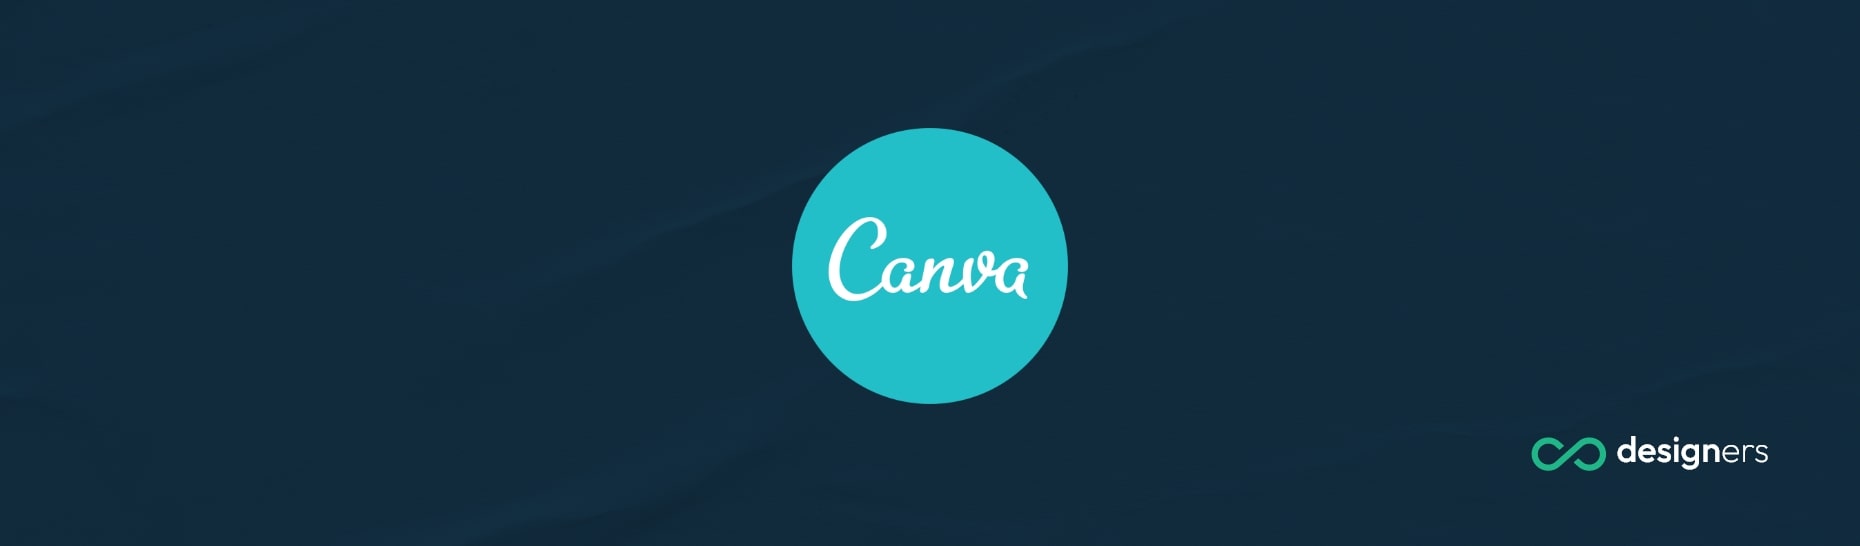 Why Is Canva Not Letting Me Download?